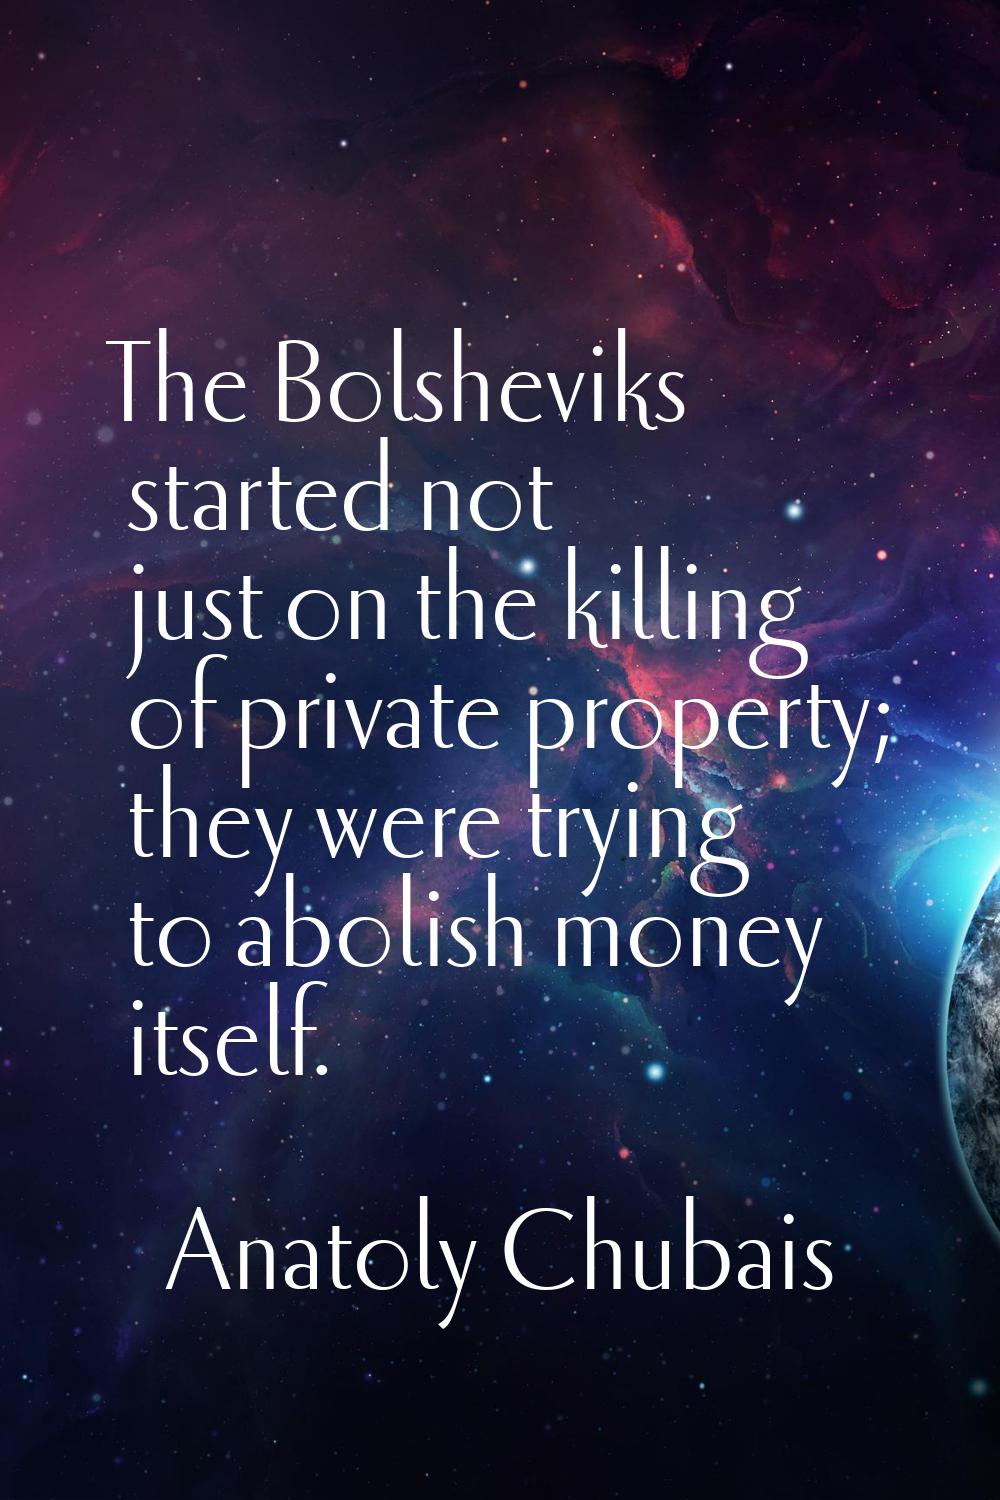 The Bolsheviks started not just on the killing of private property; they were trying to abolish mon